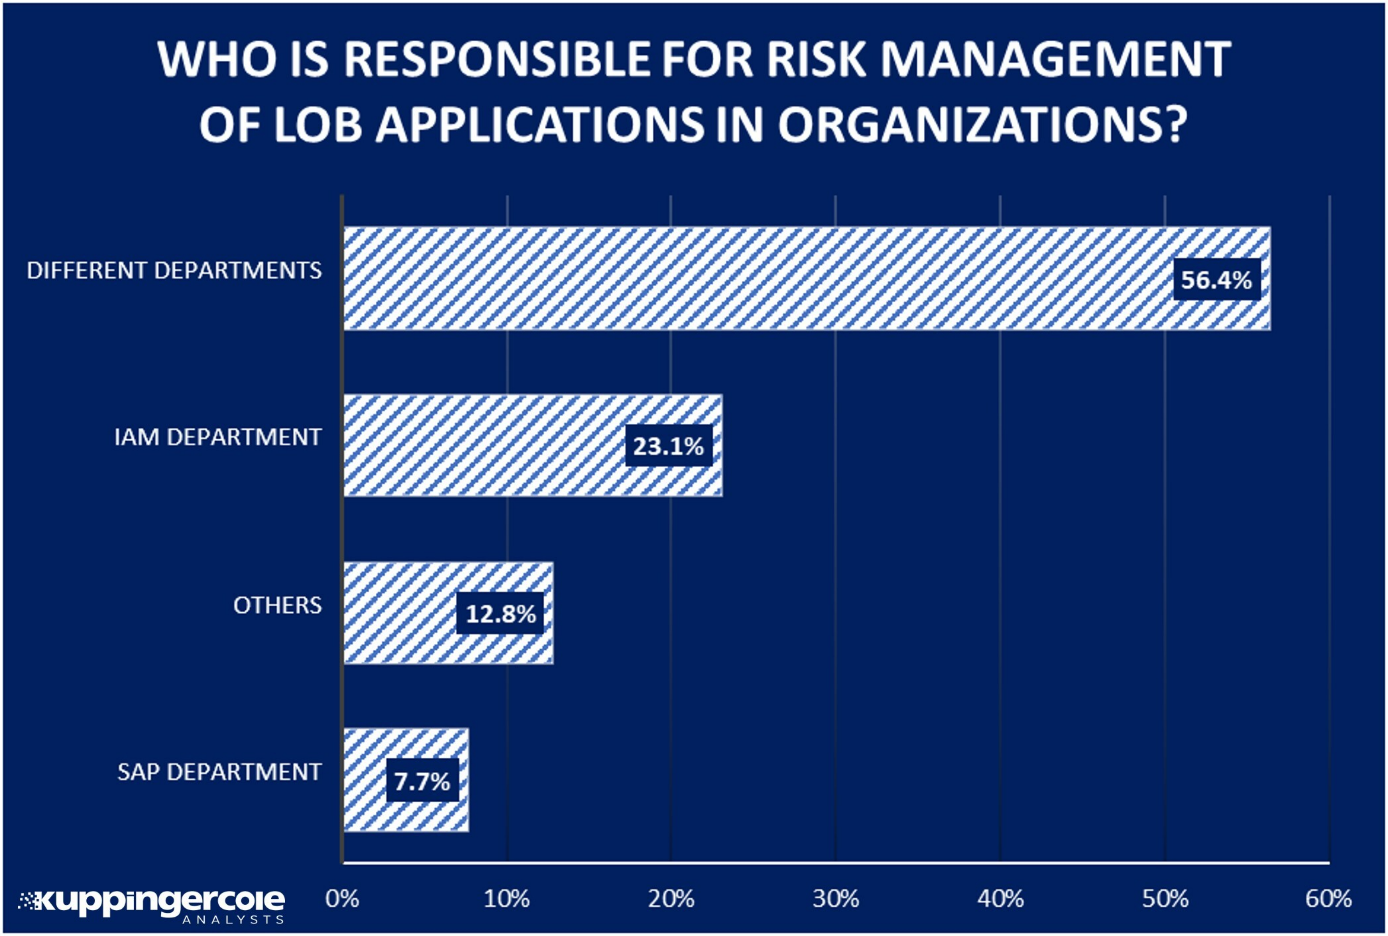 Risk Management and Security are still not handled consistently in organizations.